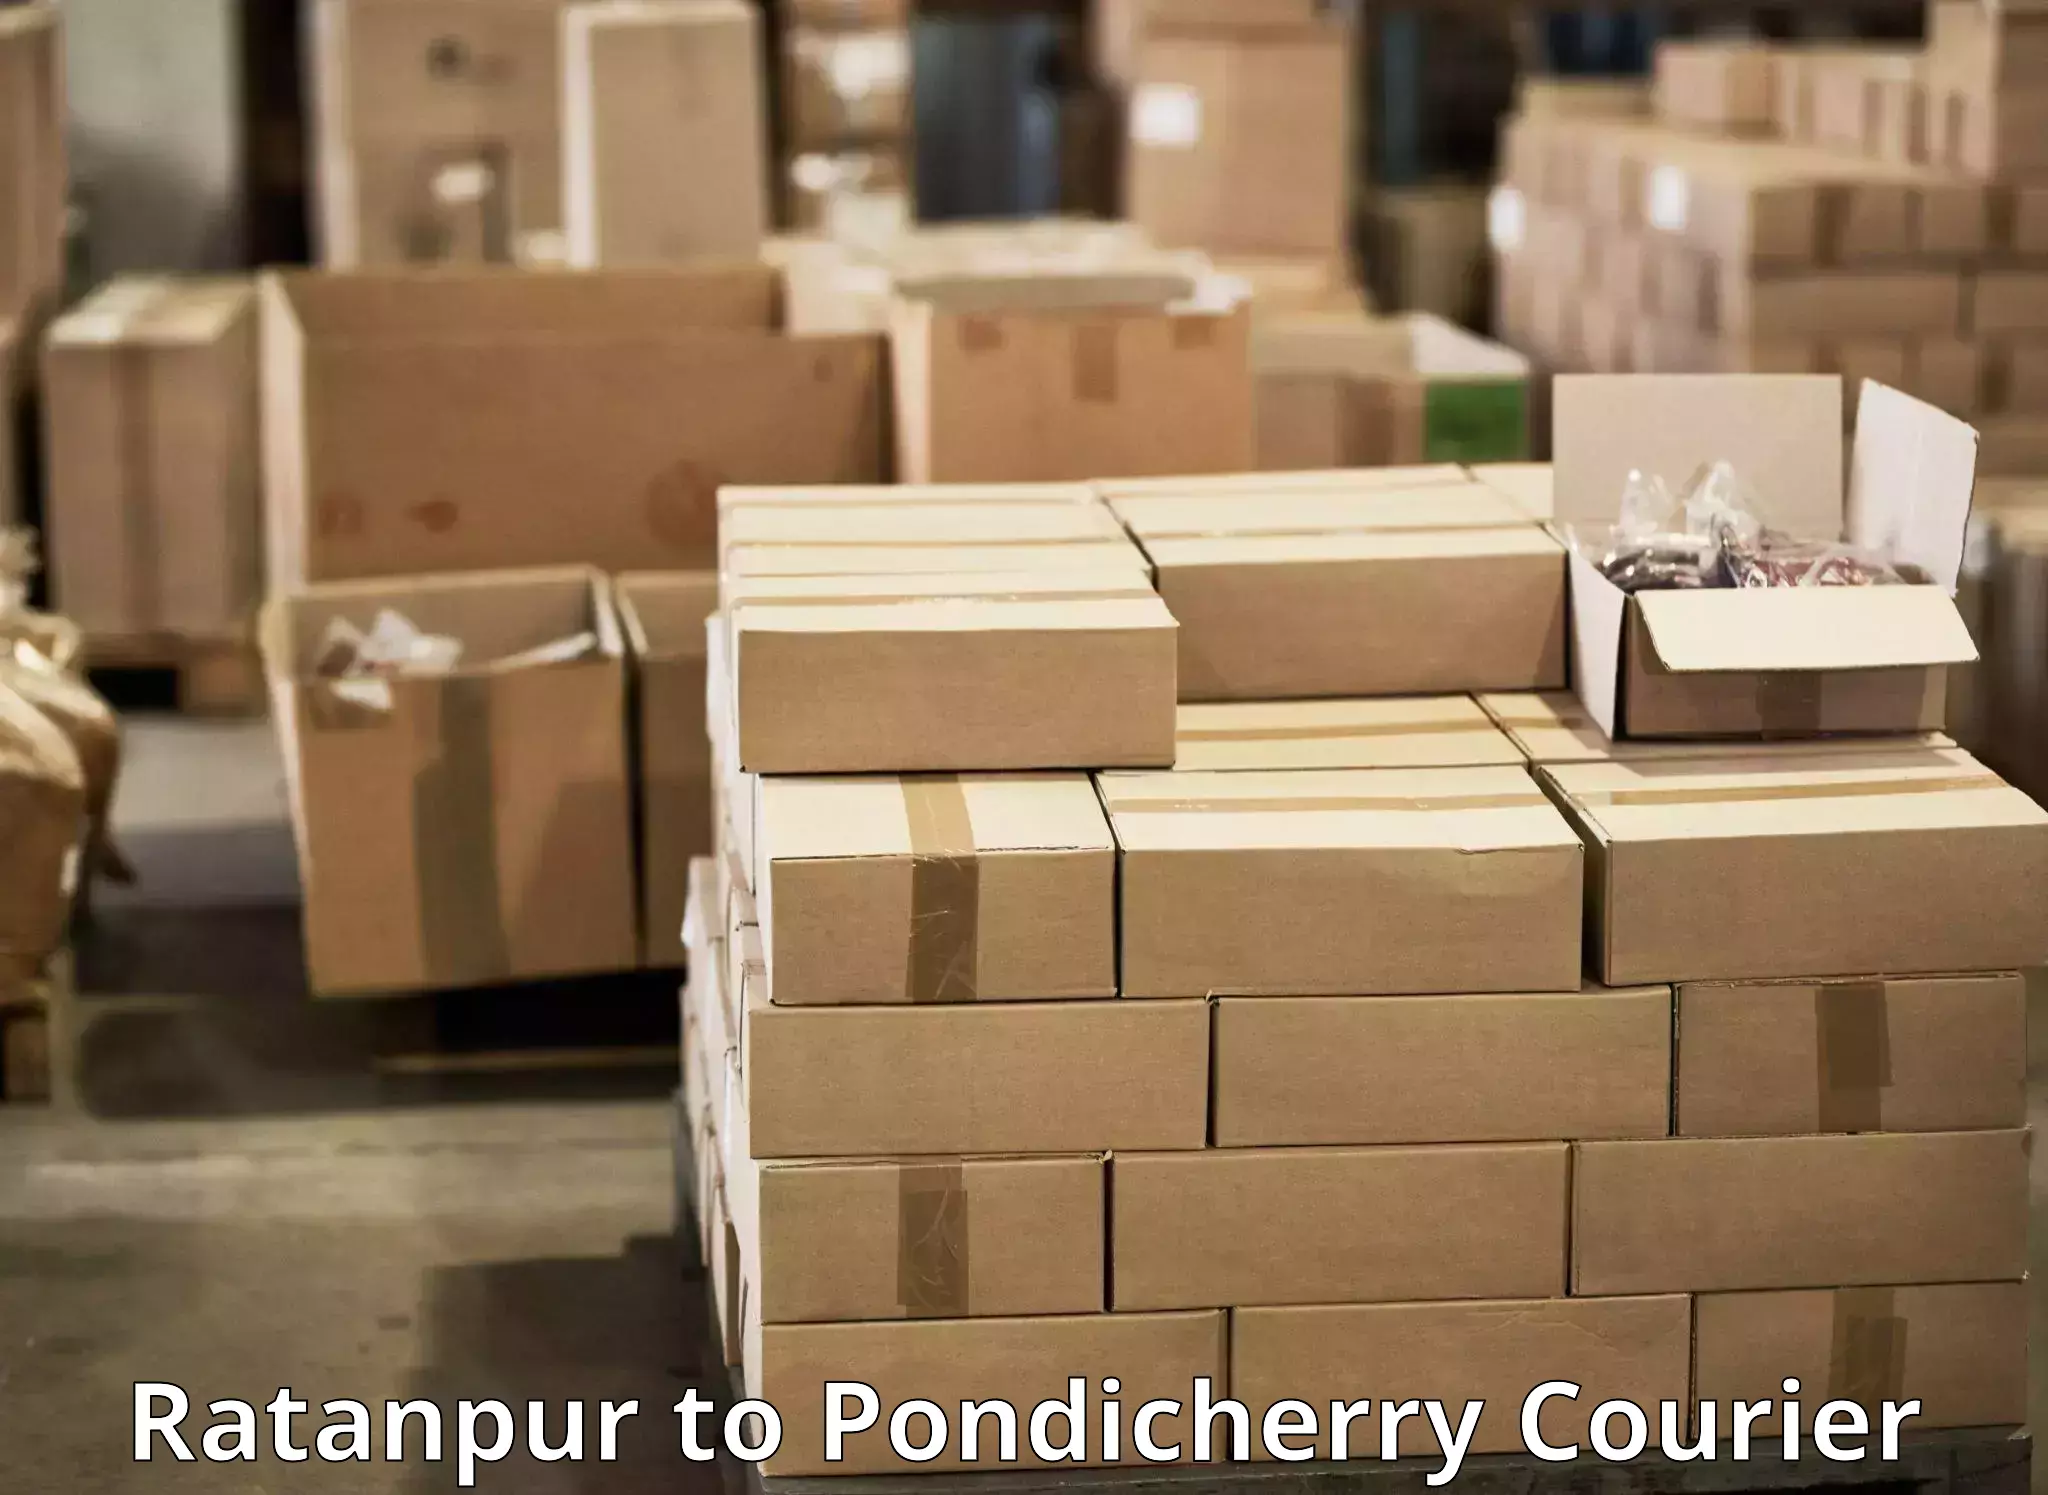 Global shipping networks in Ratanpur to Pondicherry University